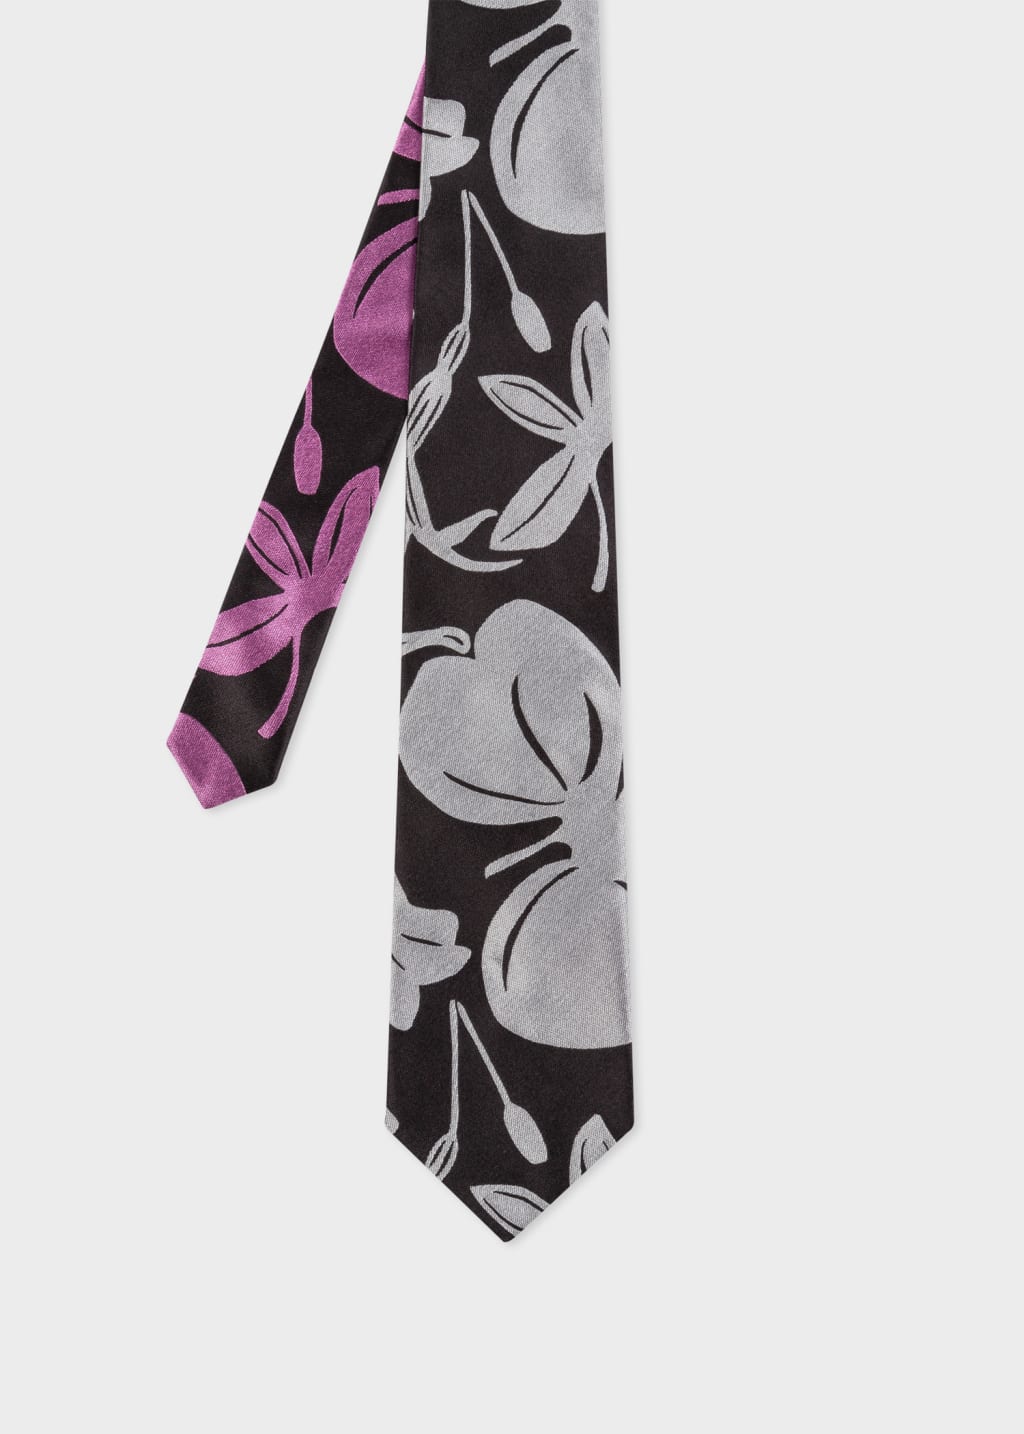 Product View - Black 'Floral Cutout' Silk Tie by Paul Smith